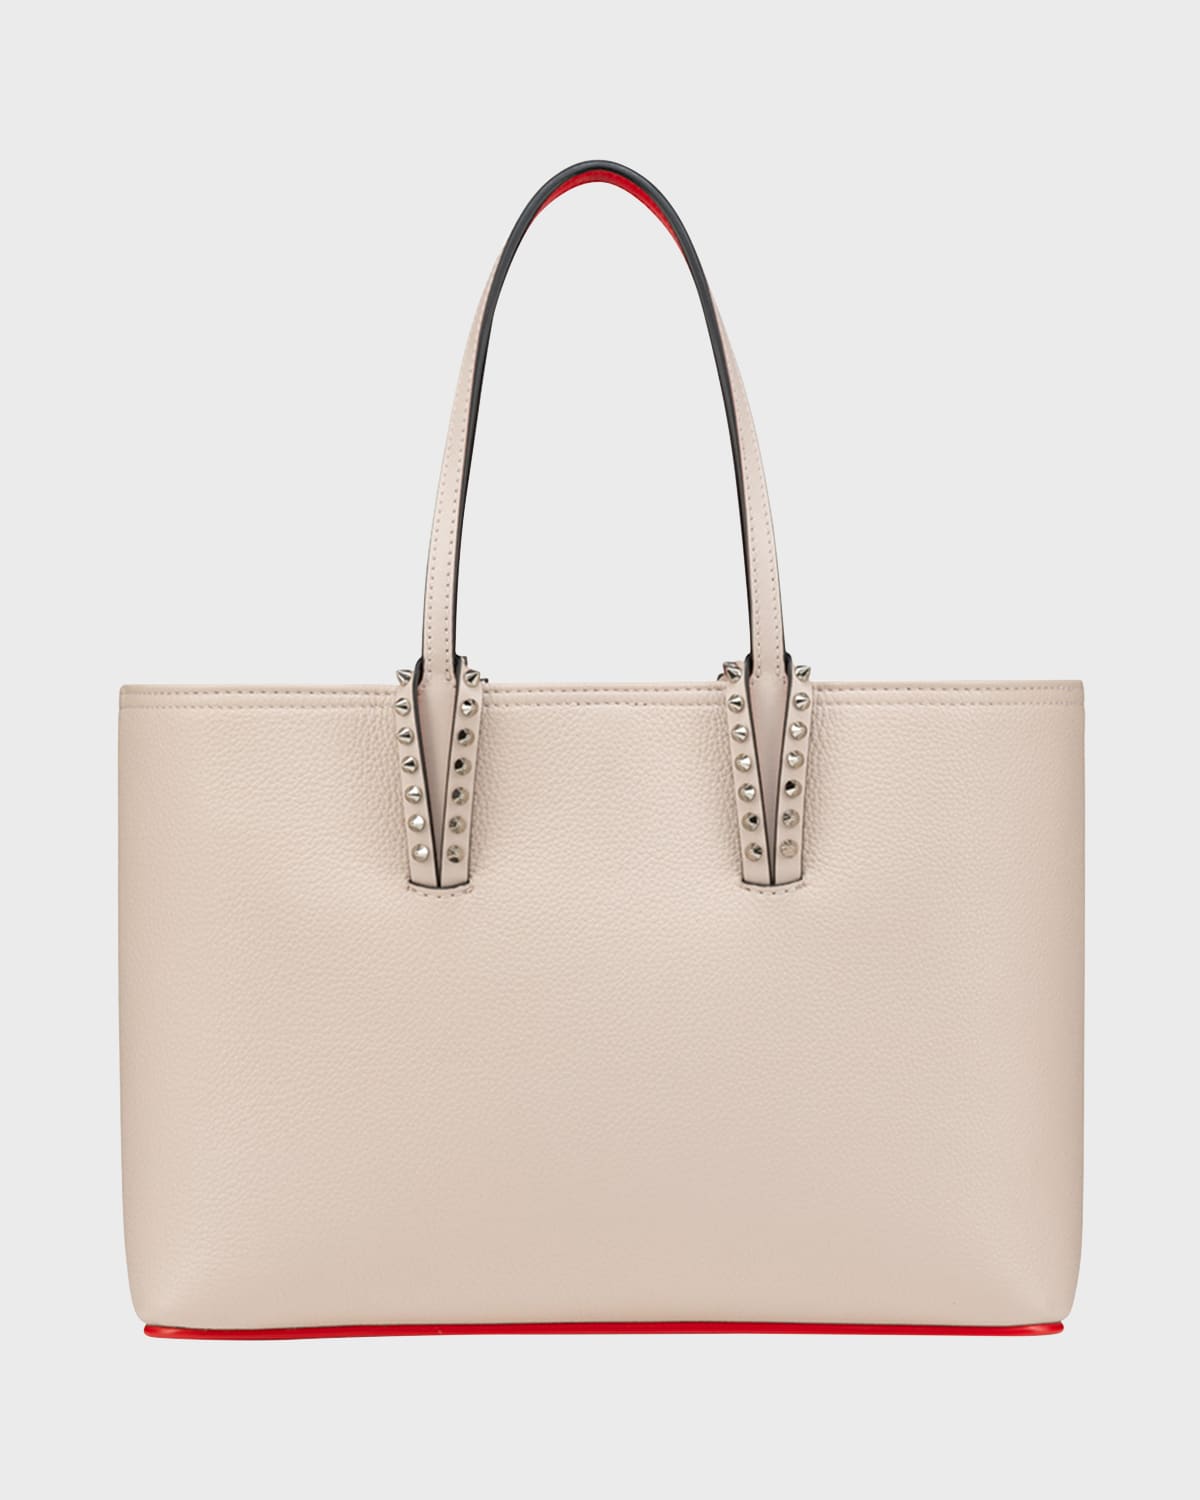 CHRISTIAN LOUBOUTIN CABATA SMALL TOTE IN GRAINED LEATHER